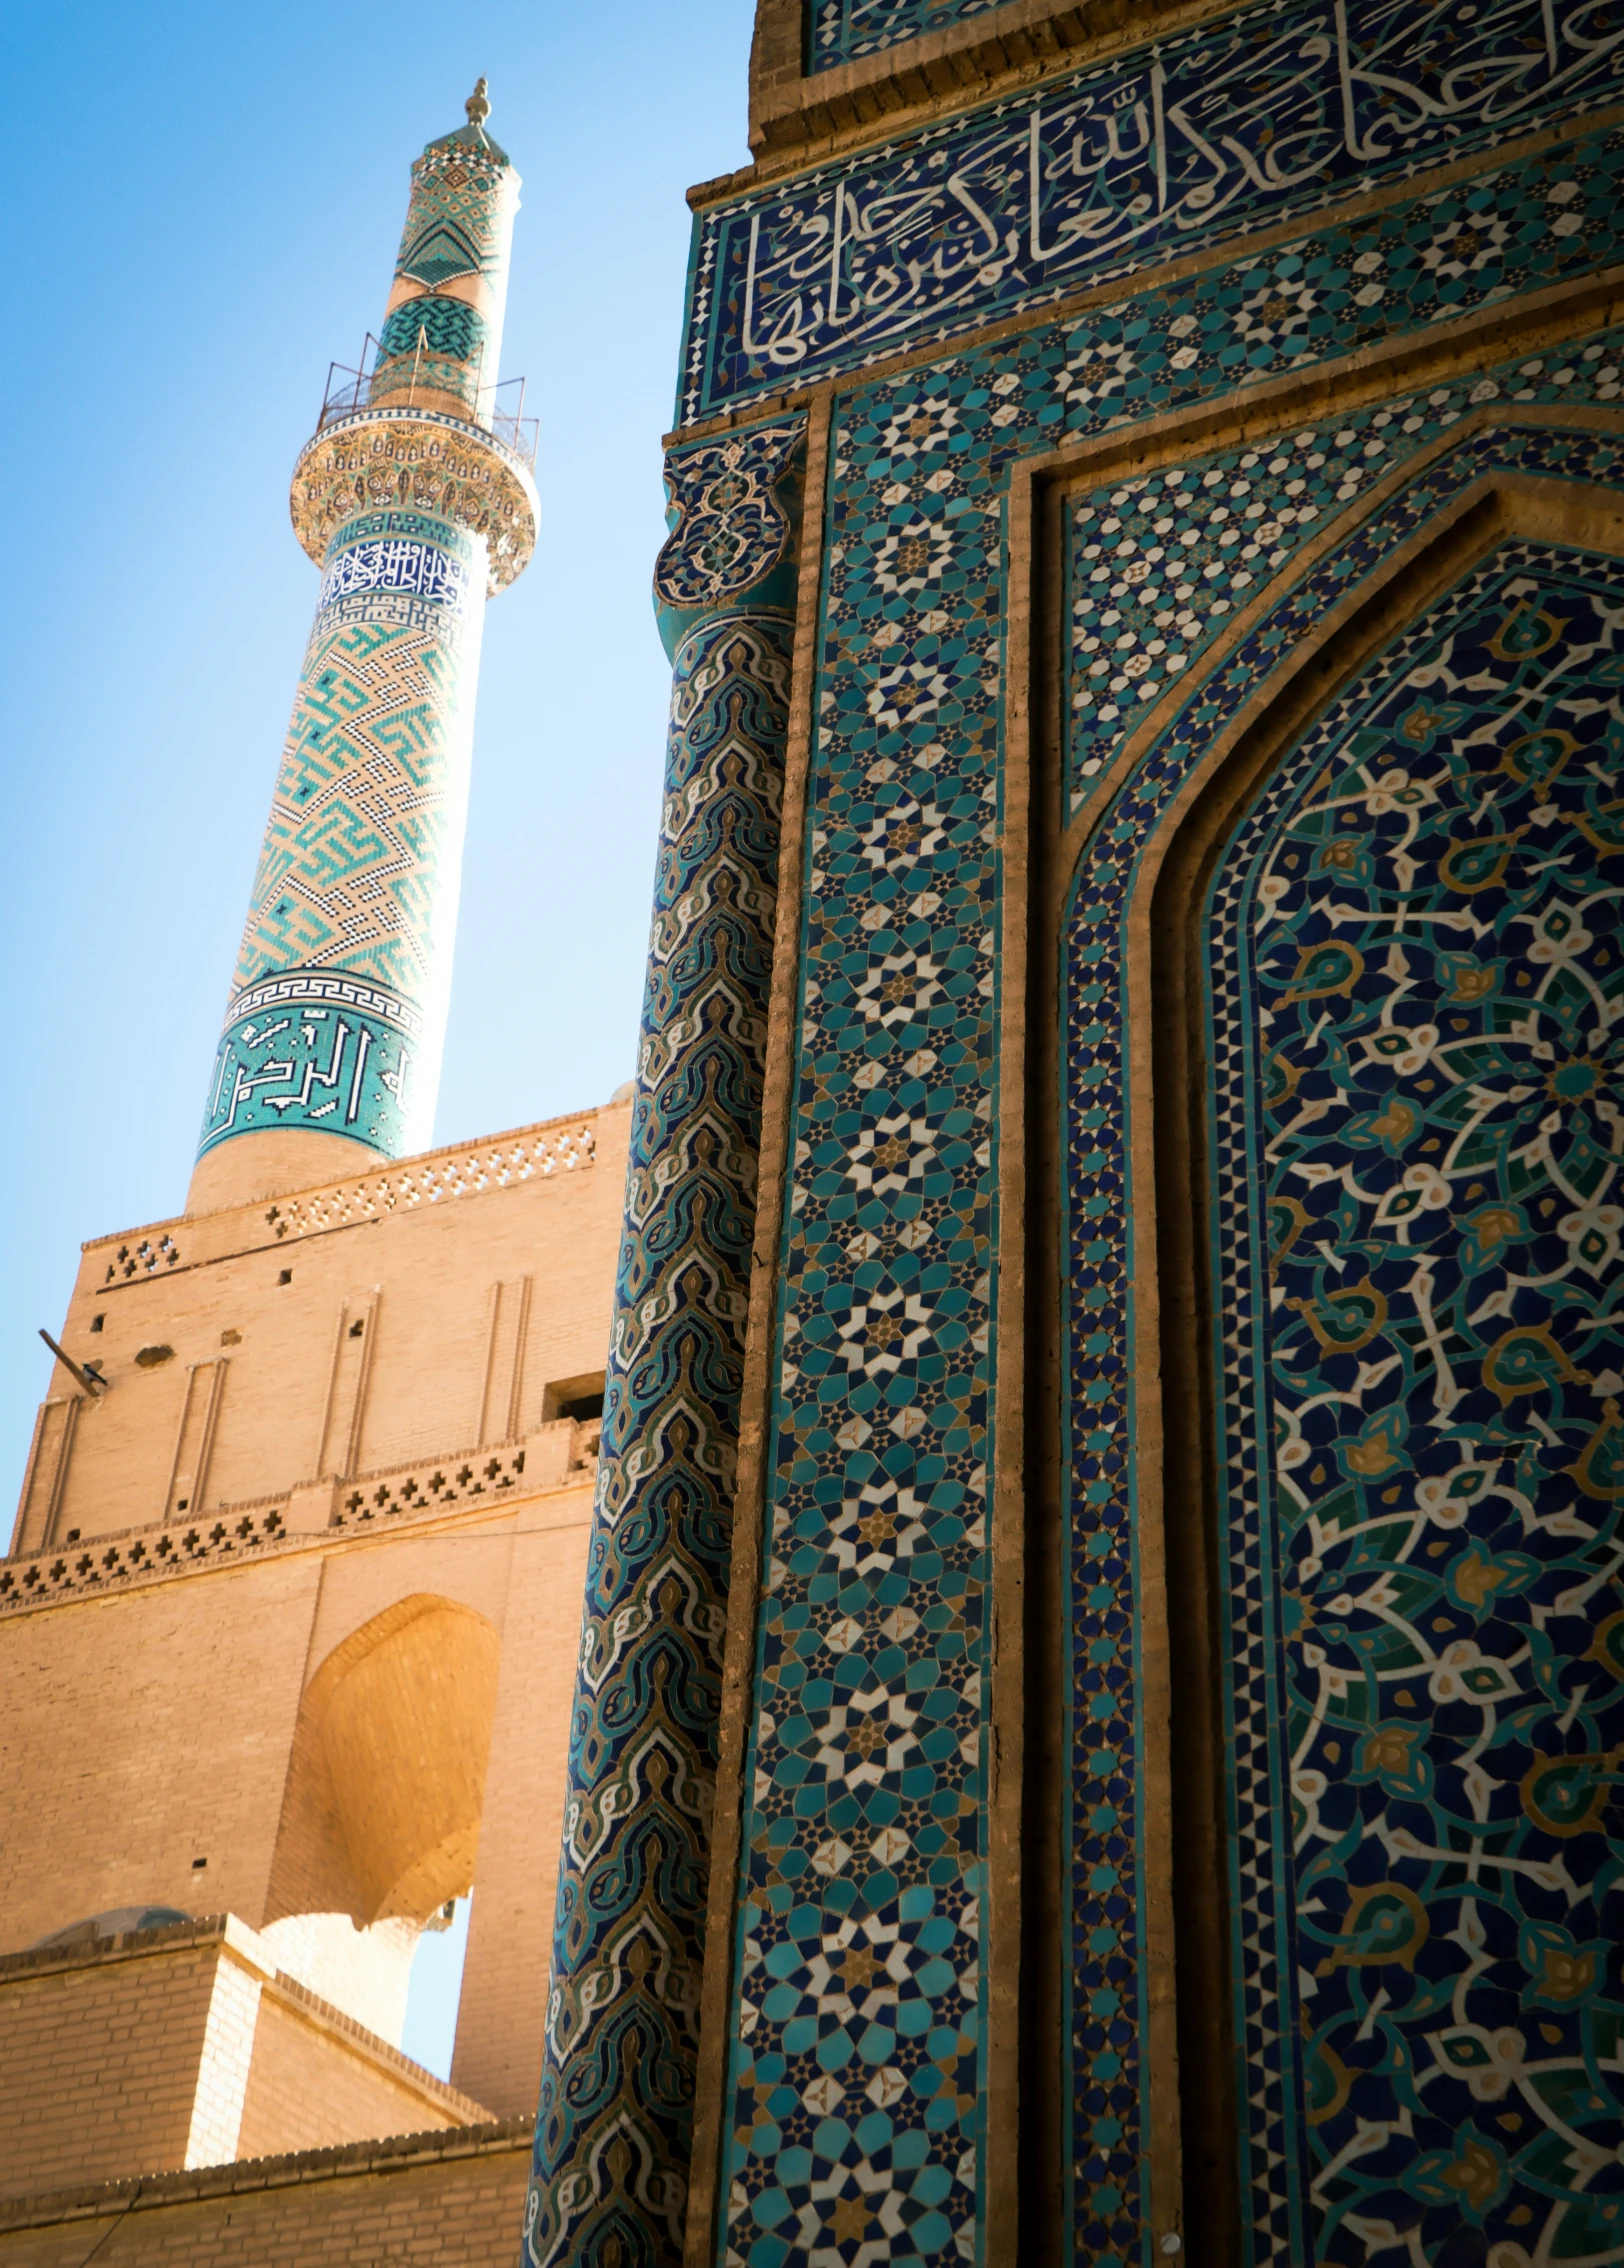 looking up at the minaret of a building, featuring decorative tilework and a cross - work on one side